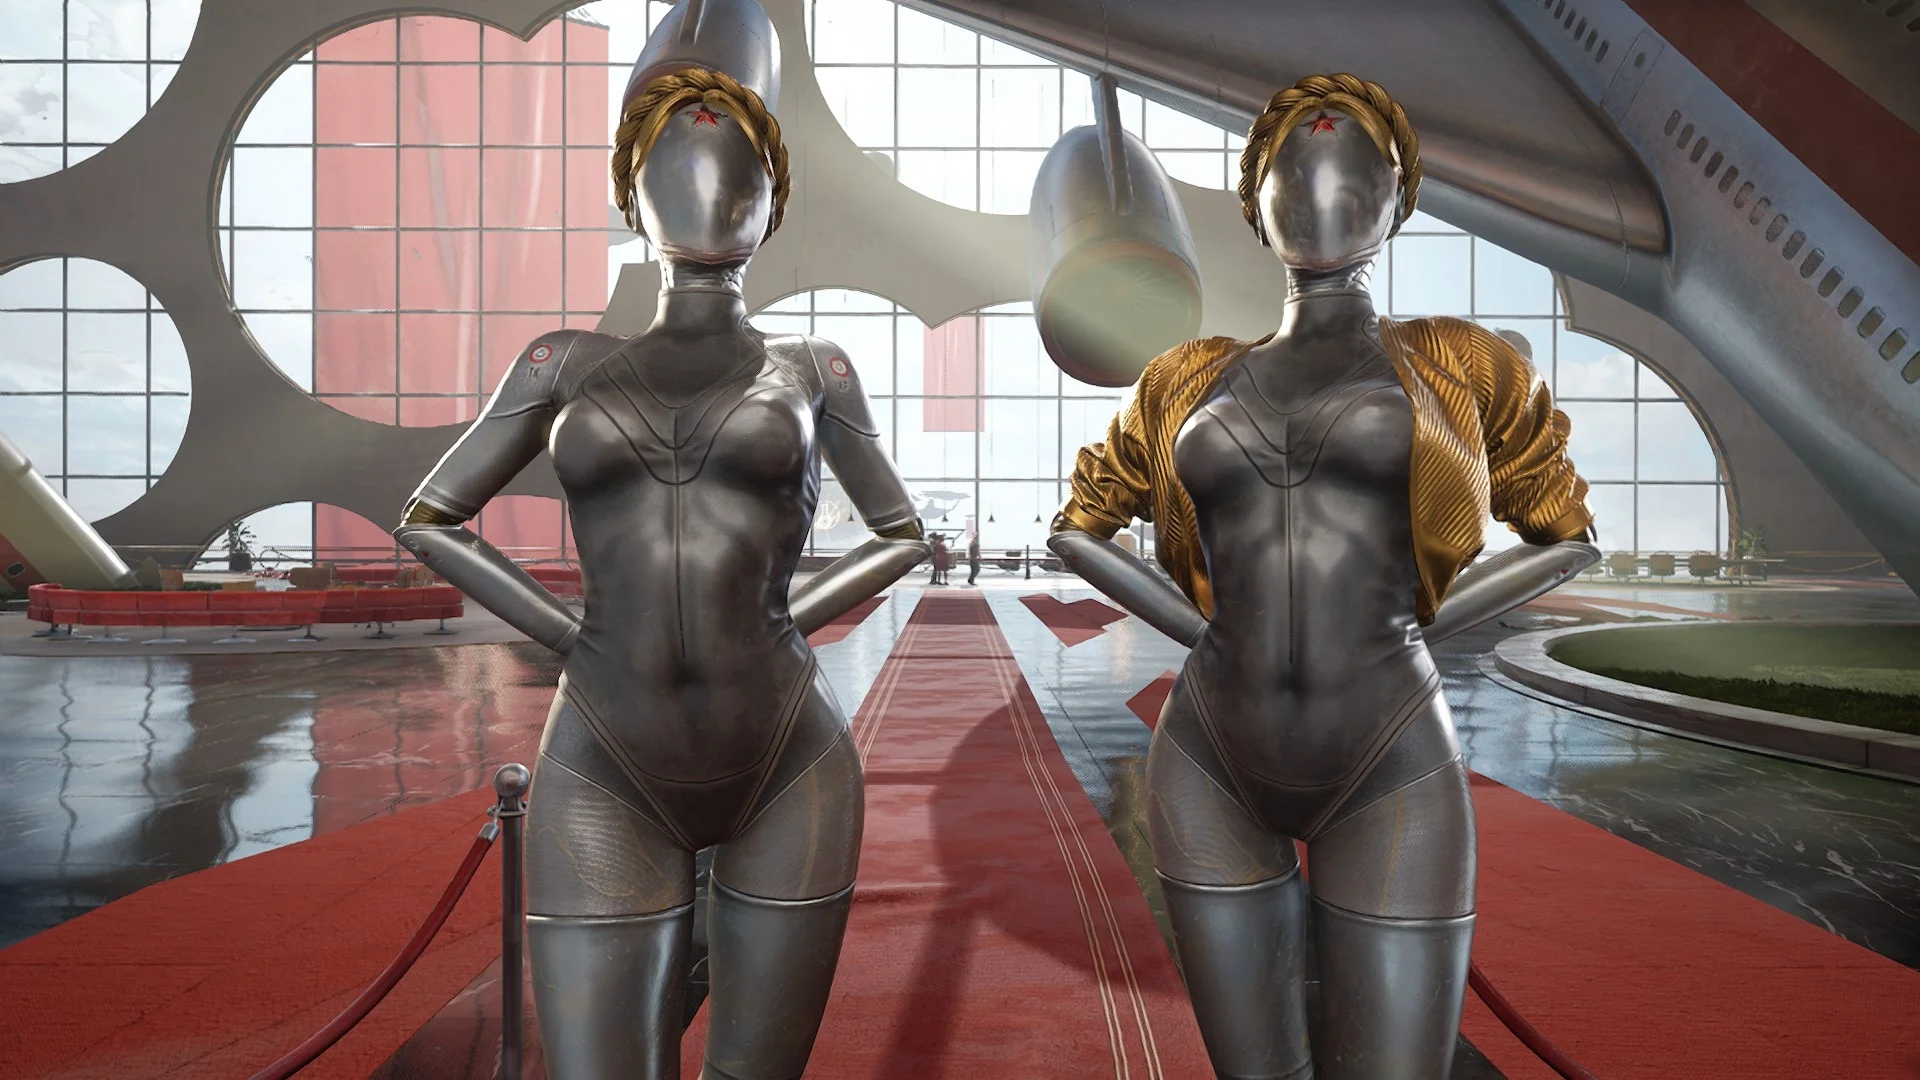 The creators of Atomic Heart presented exclusive merch for the game - a statue of the Twins